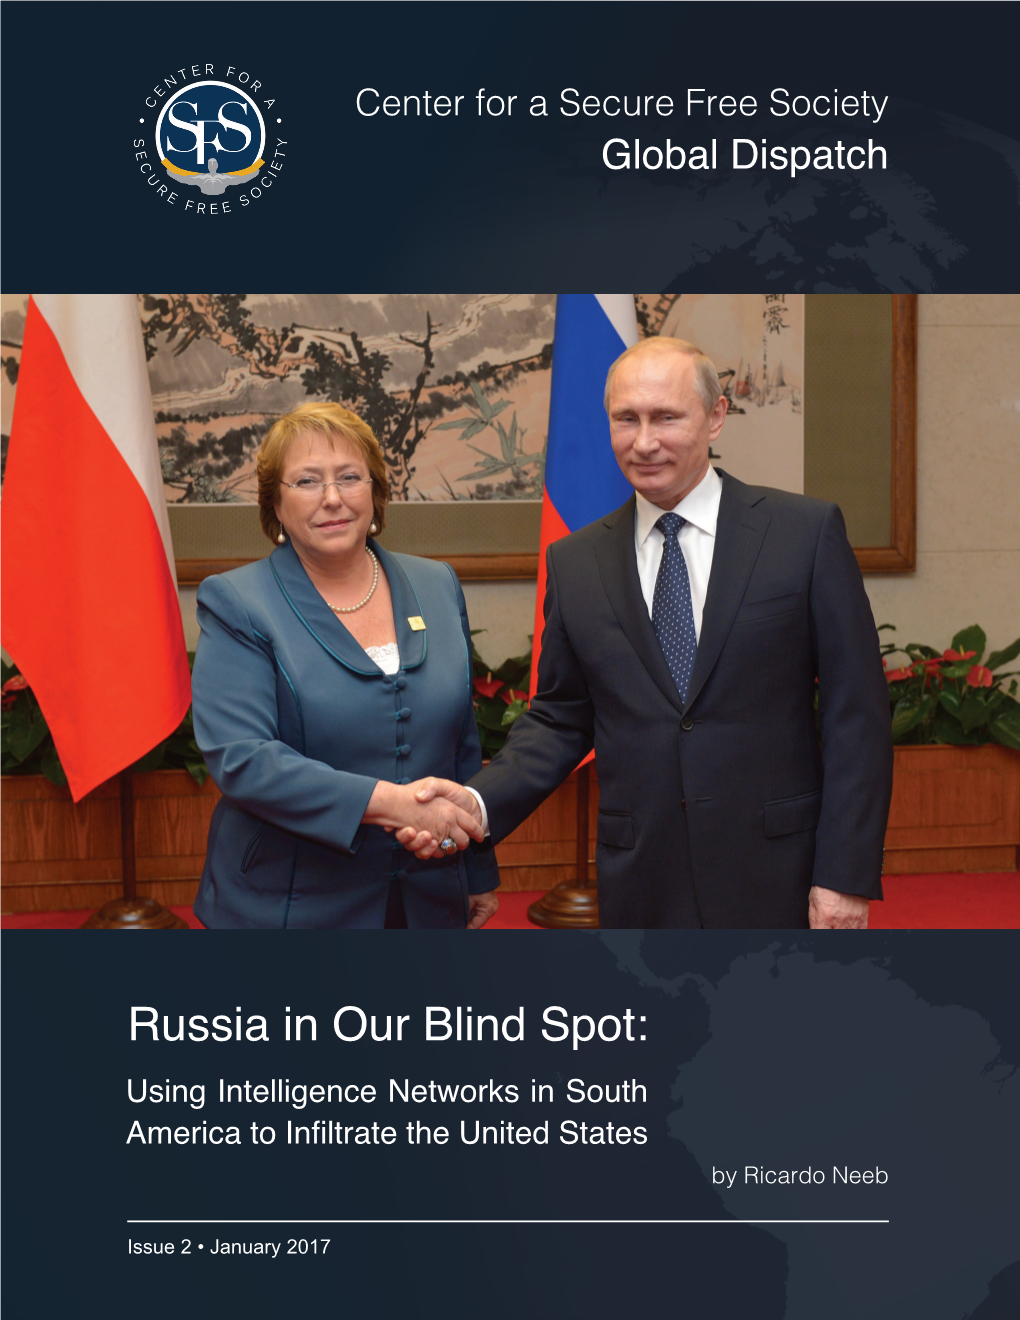 Russia in Our Blind Spot: Using Intelligence Networks in South America to Infiltrate the United States by Ricardo Neeb